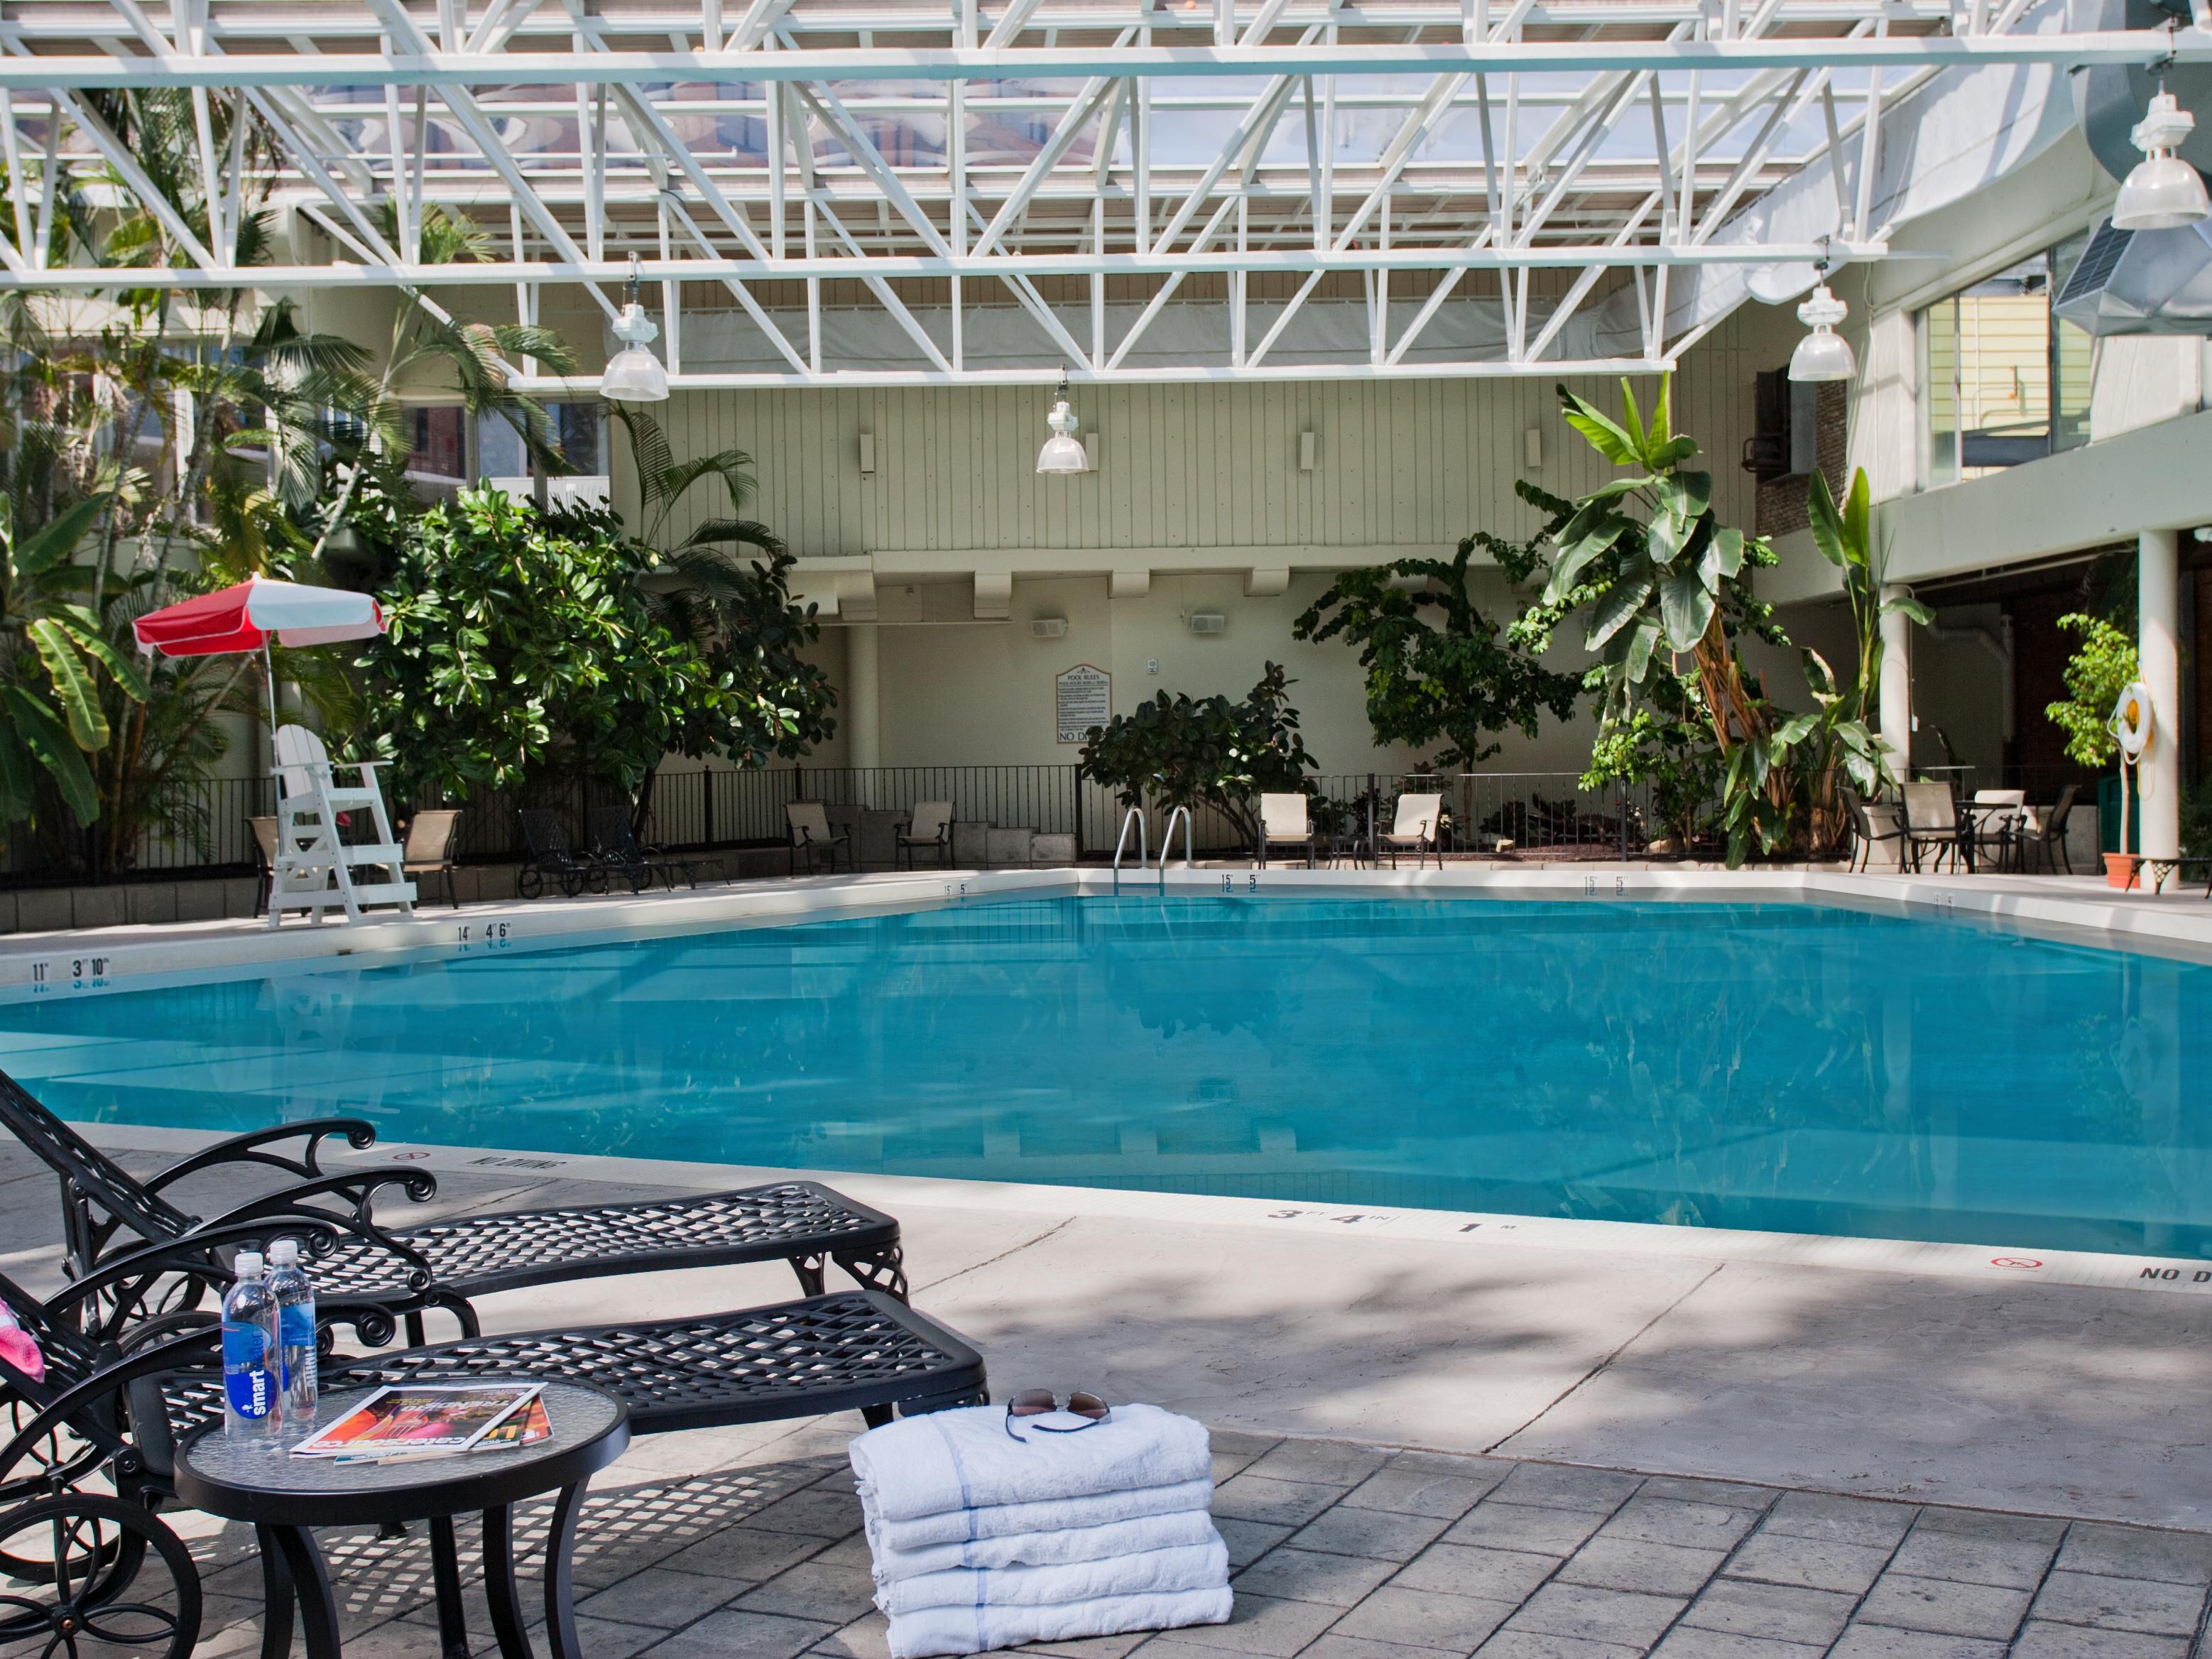 Take a splash and cool down in our tropical indoor/outdoor pool. Whether you enjoy swimming laps, relaxing poolside, or suntanning out on our pool deck. In season, our pool is under cover but with an open wall to our outdoor pool deck. Once the chilly weather hits, it becomes a heated and enclosed oasis! Pool use is restricted to hotel guests only.